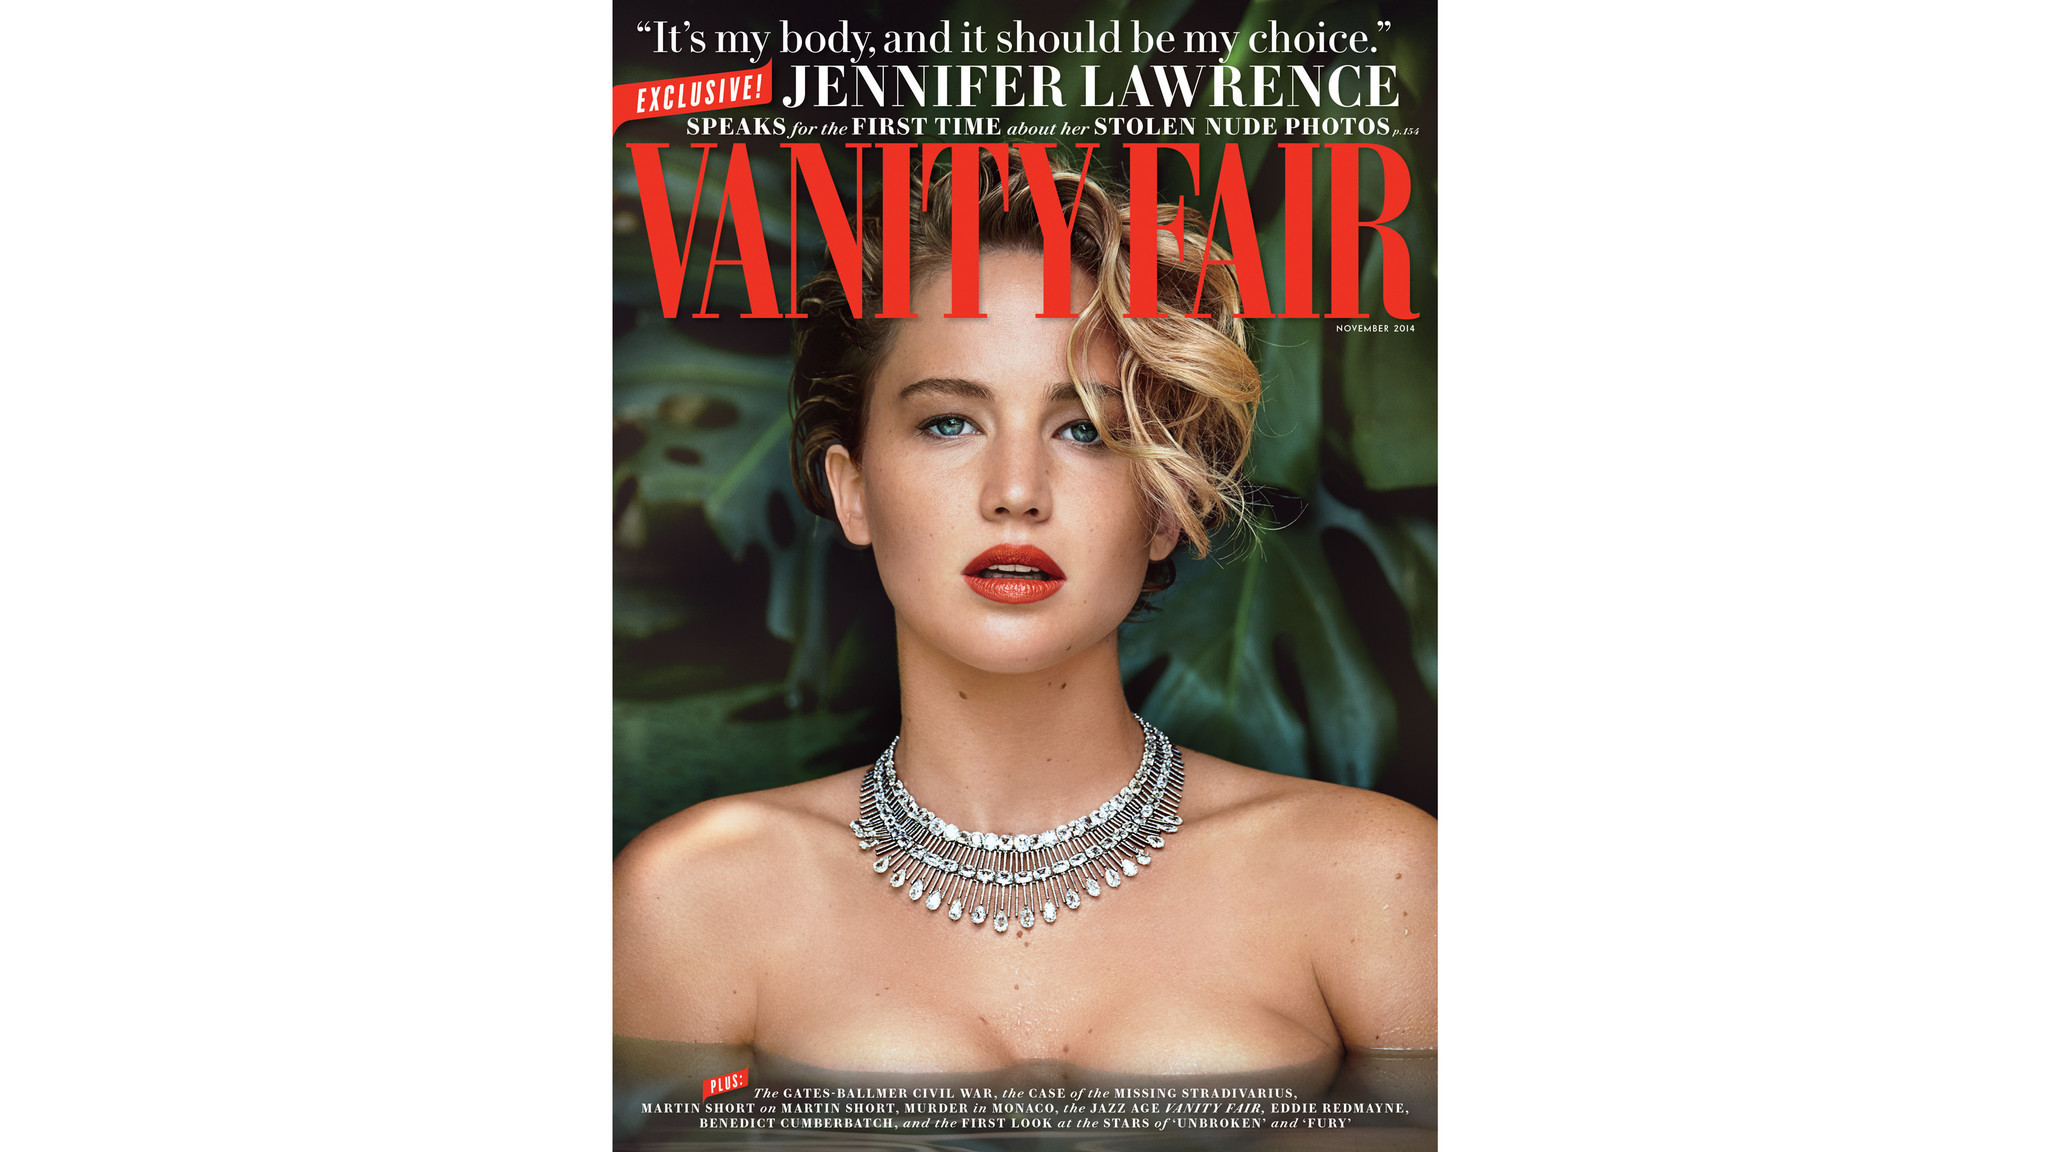 Jennifer Lawrence Sex Crime Victim Or In Need Of A Reality Check